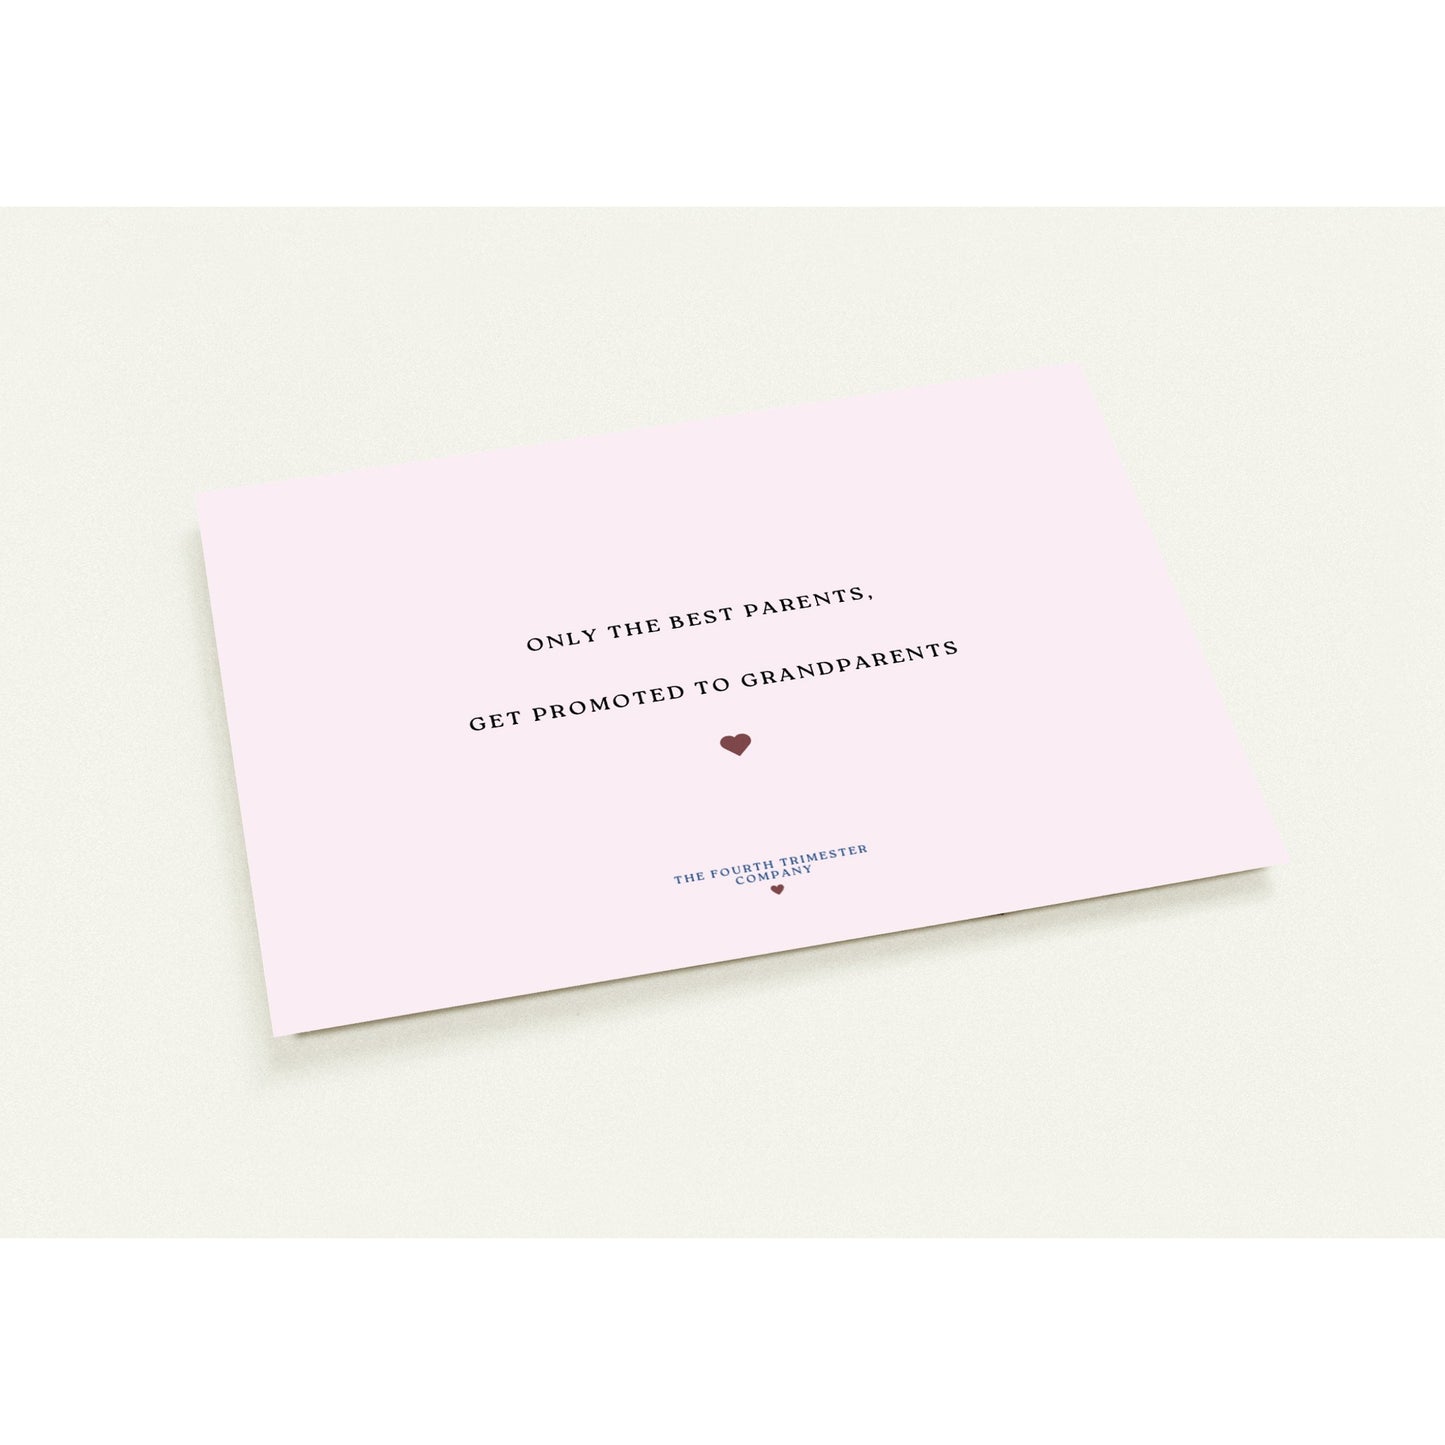 'Only the best Parents' 10 Announcement Cards- Blush Pink.